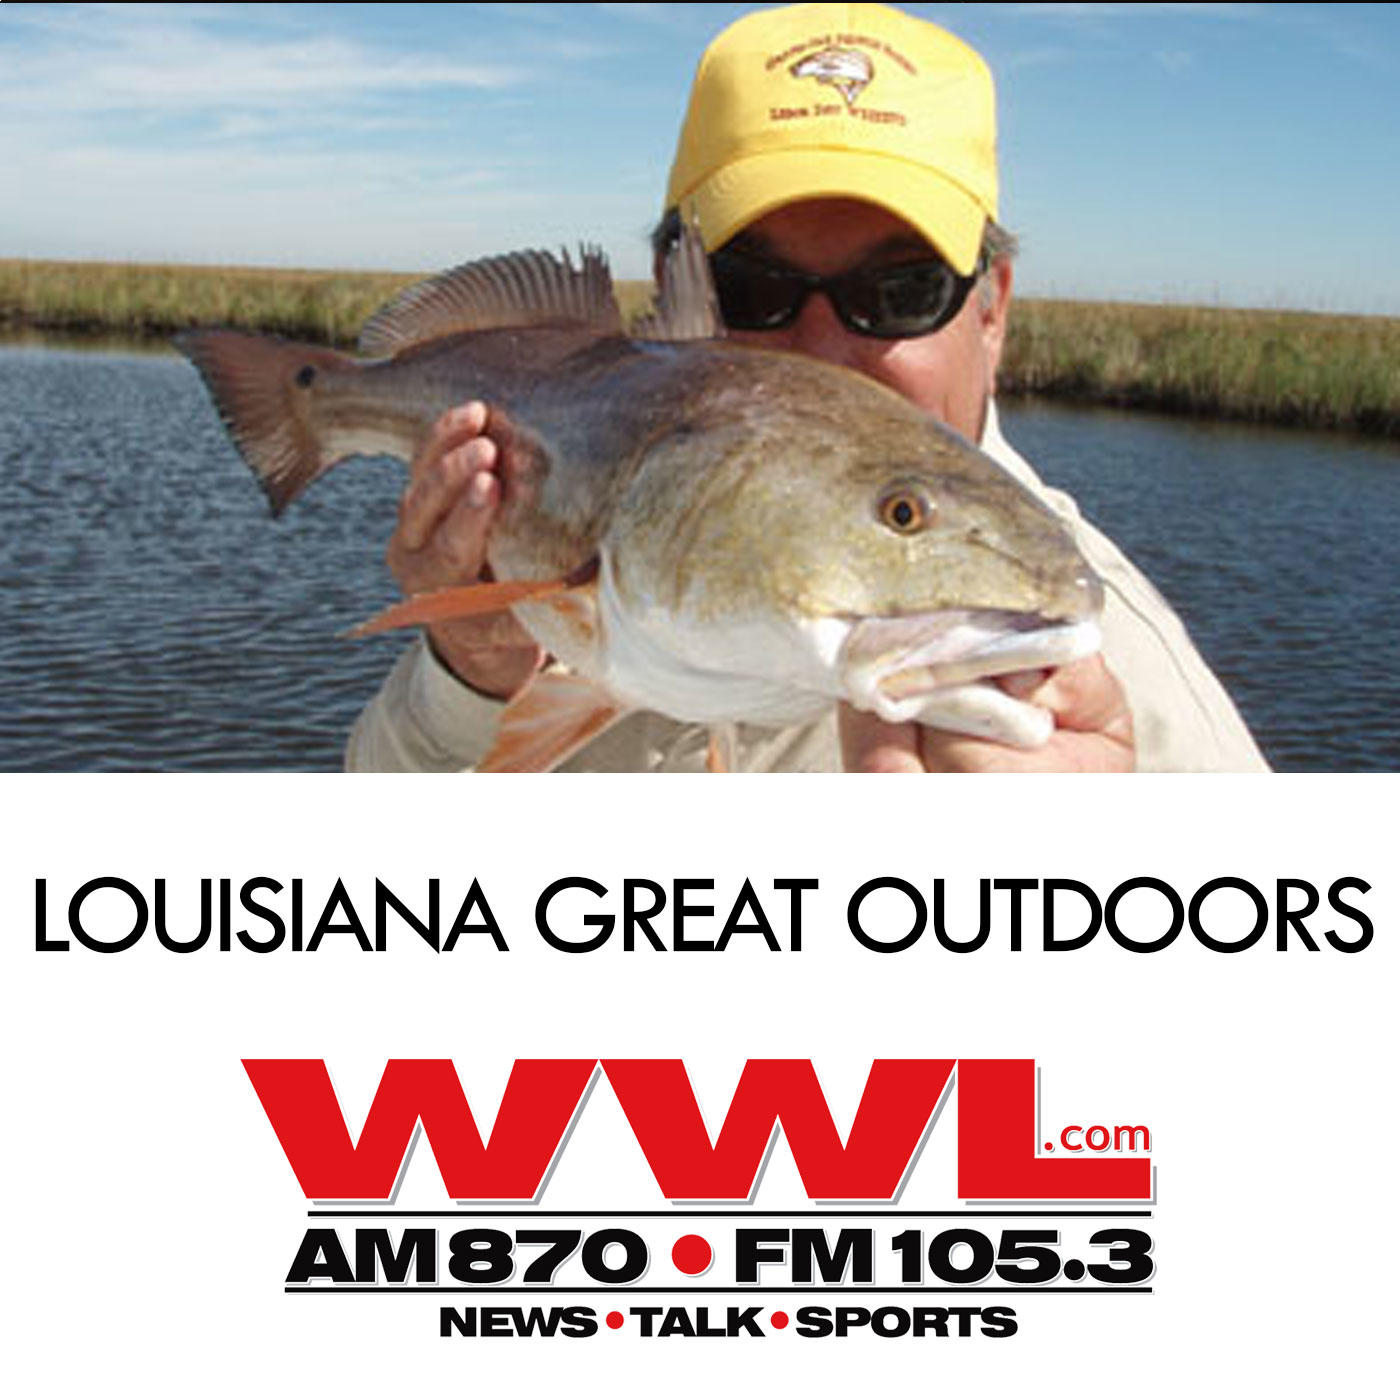 Blaine tells all about a secret fishing reservoir in Texas!